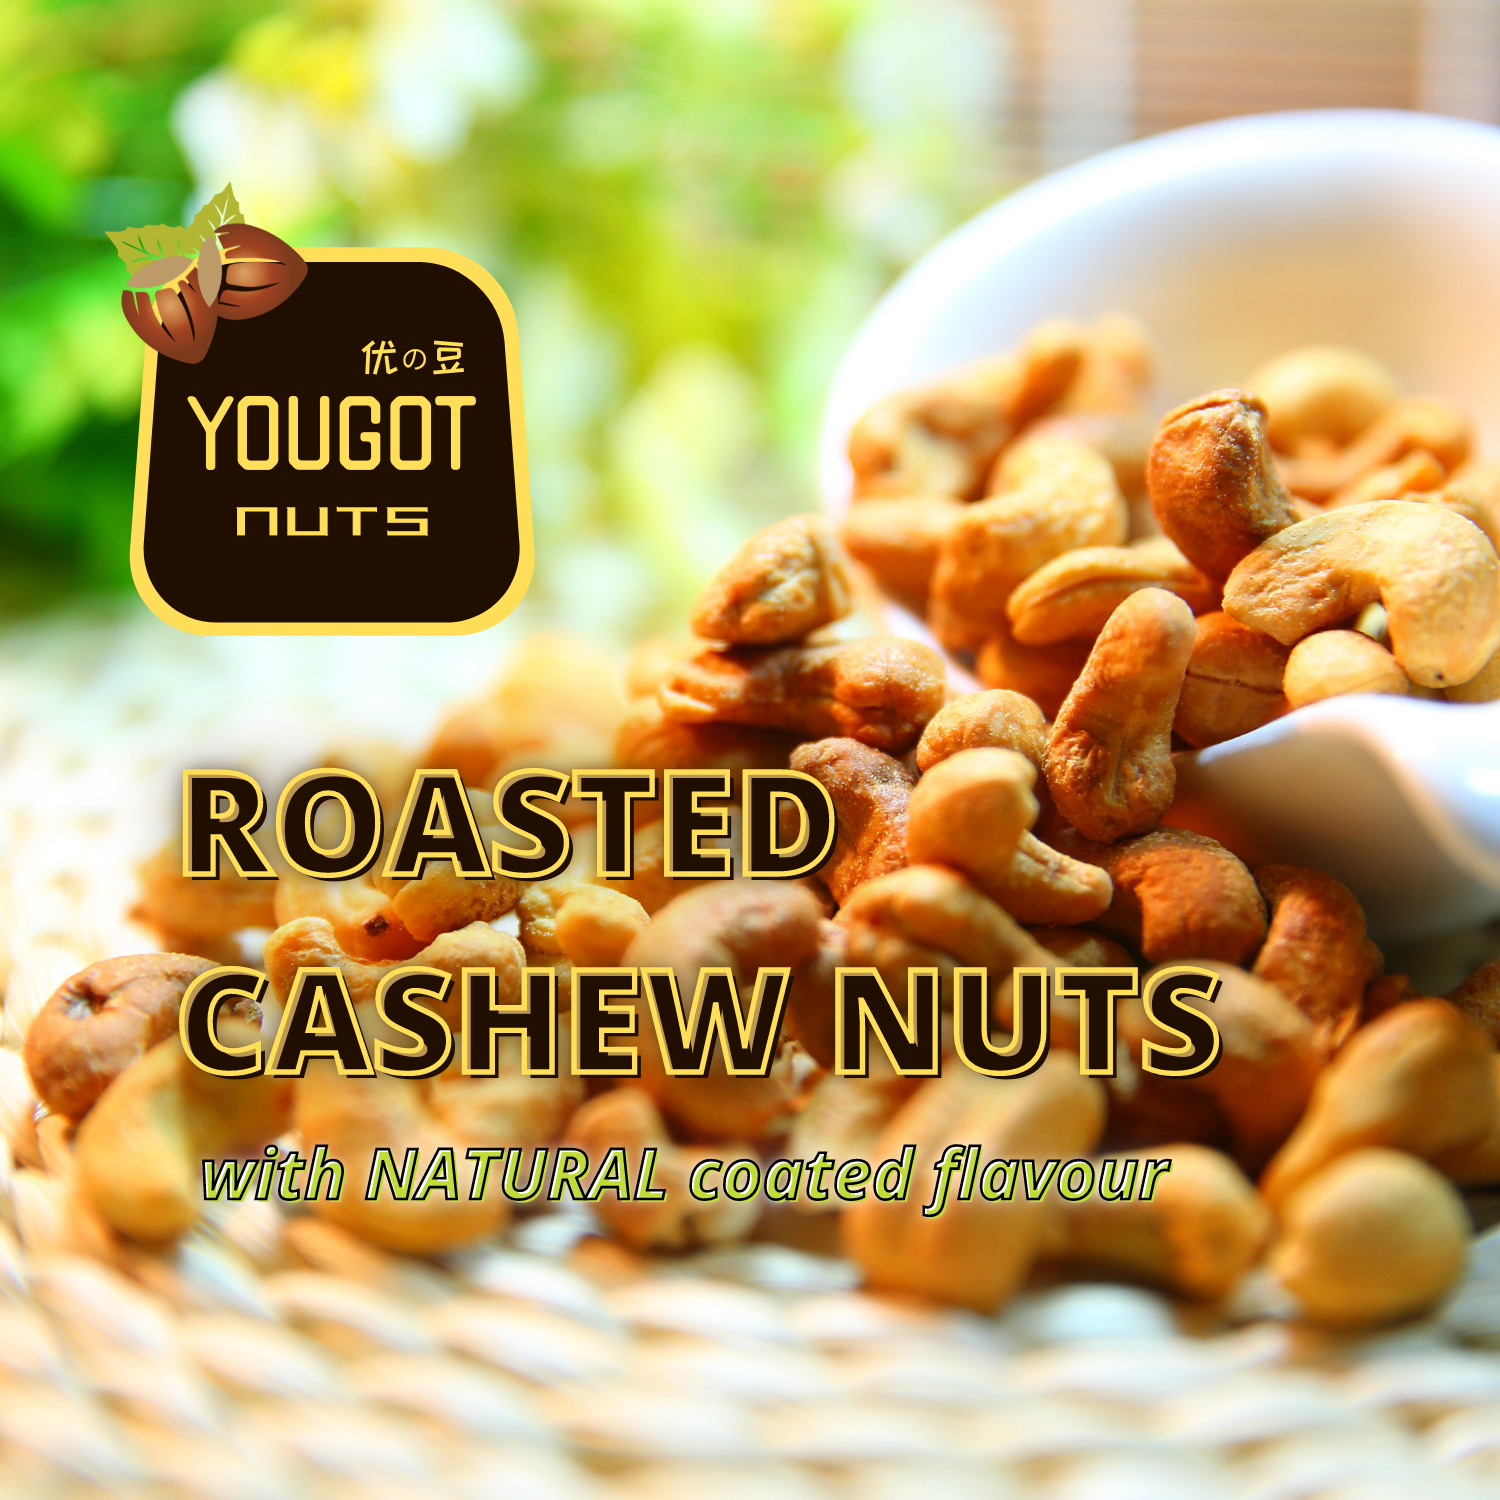 YOUGOT NUTS Roasted Cashew Nuts | Naturally Coated Flavors